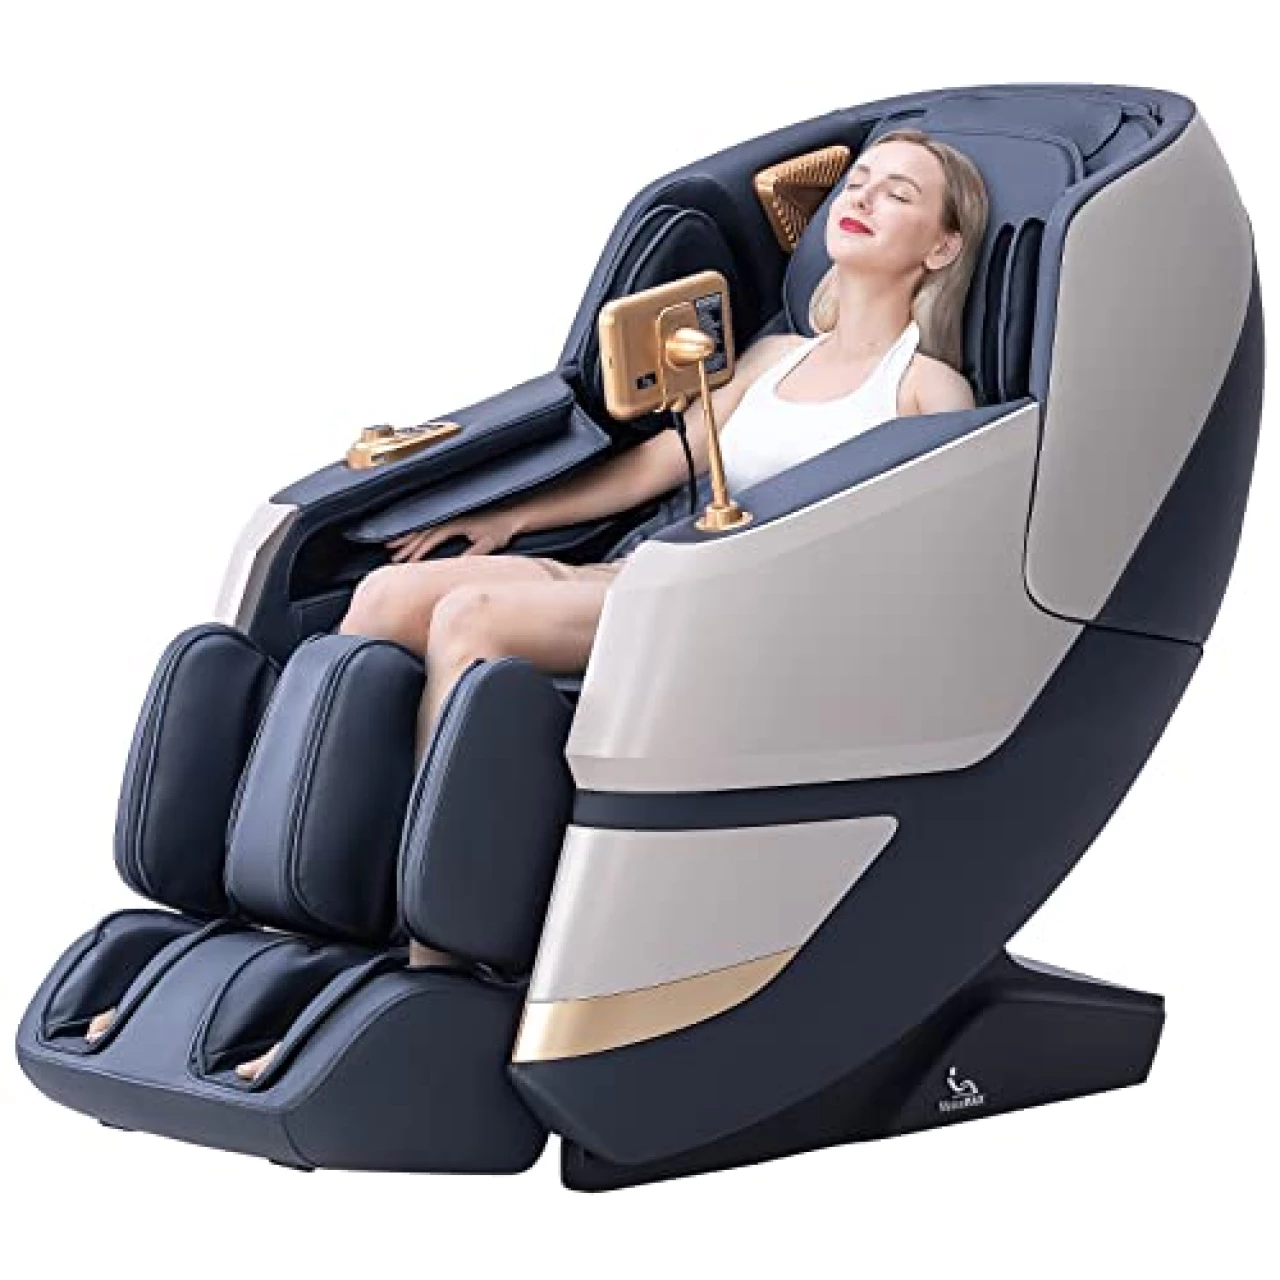 MassaMAX 4D Massage Chair, Full Body Recliner with Zero Gravity, Electric Extendable Footrest, Deep Yoga Stretch, Foot Rollers, and Heat (Magic Black)